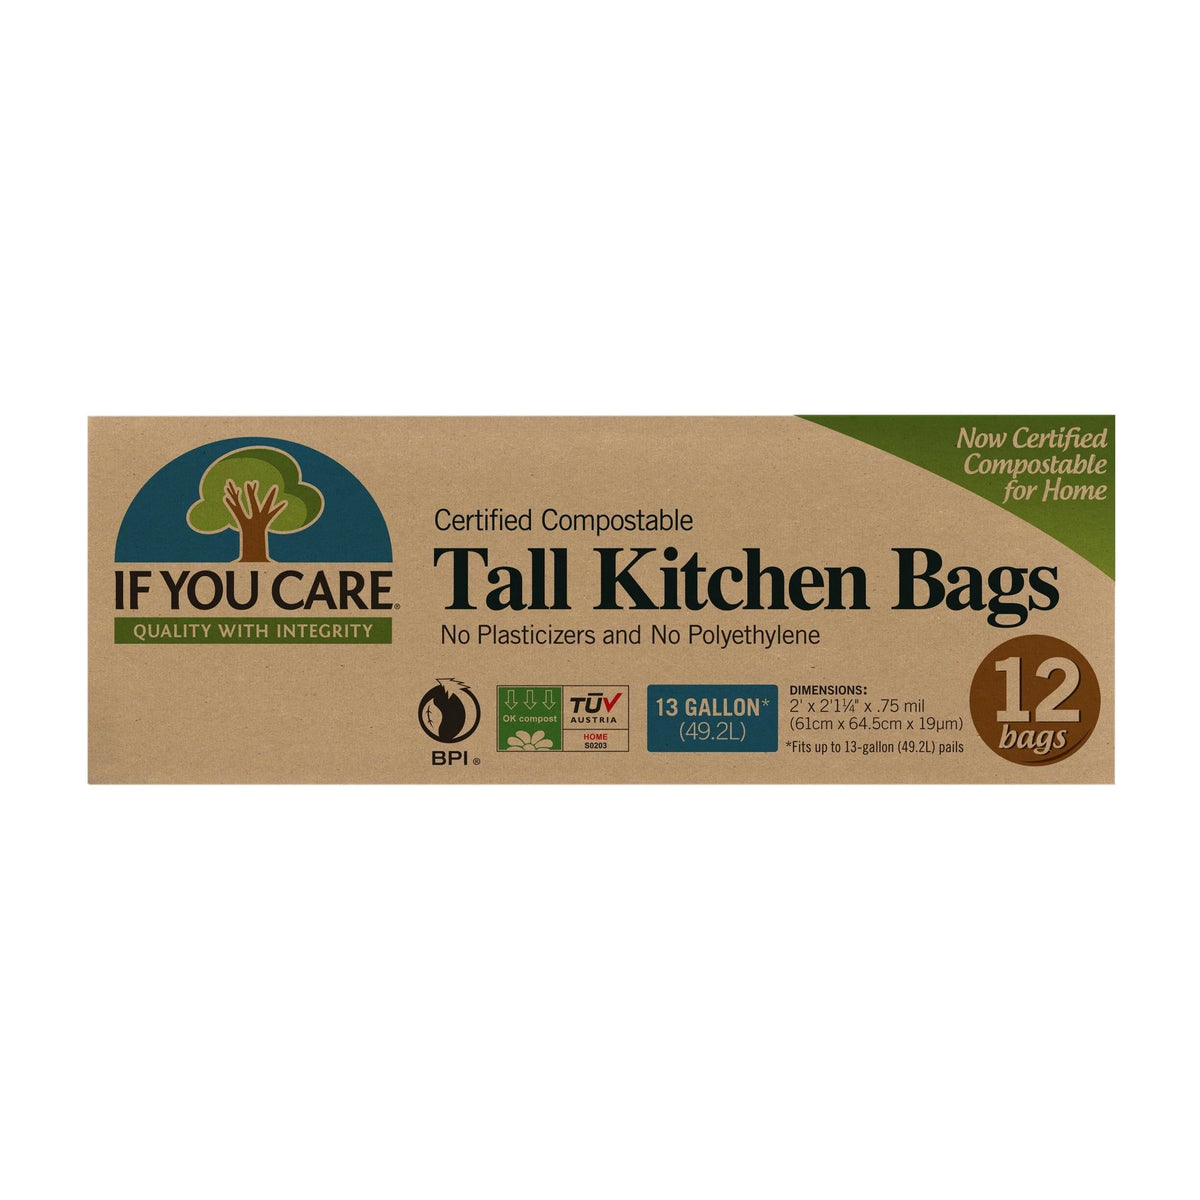 Certified compostable tall kitchen trash bags from If You Care. 12 count Eco Friendly garbage bags.